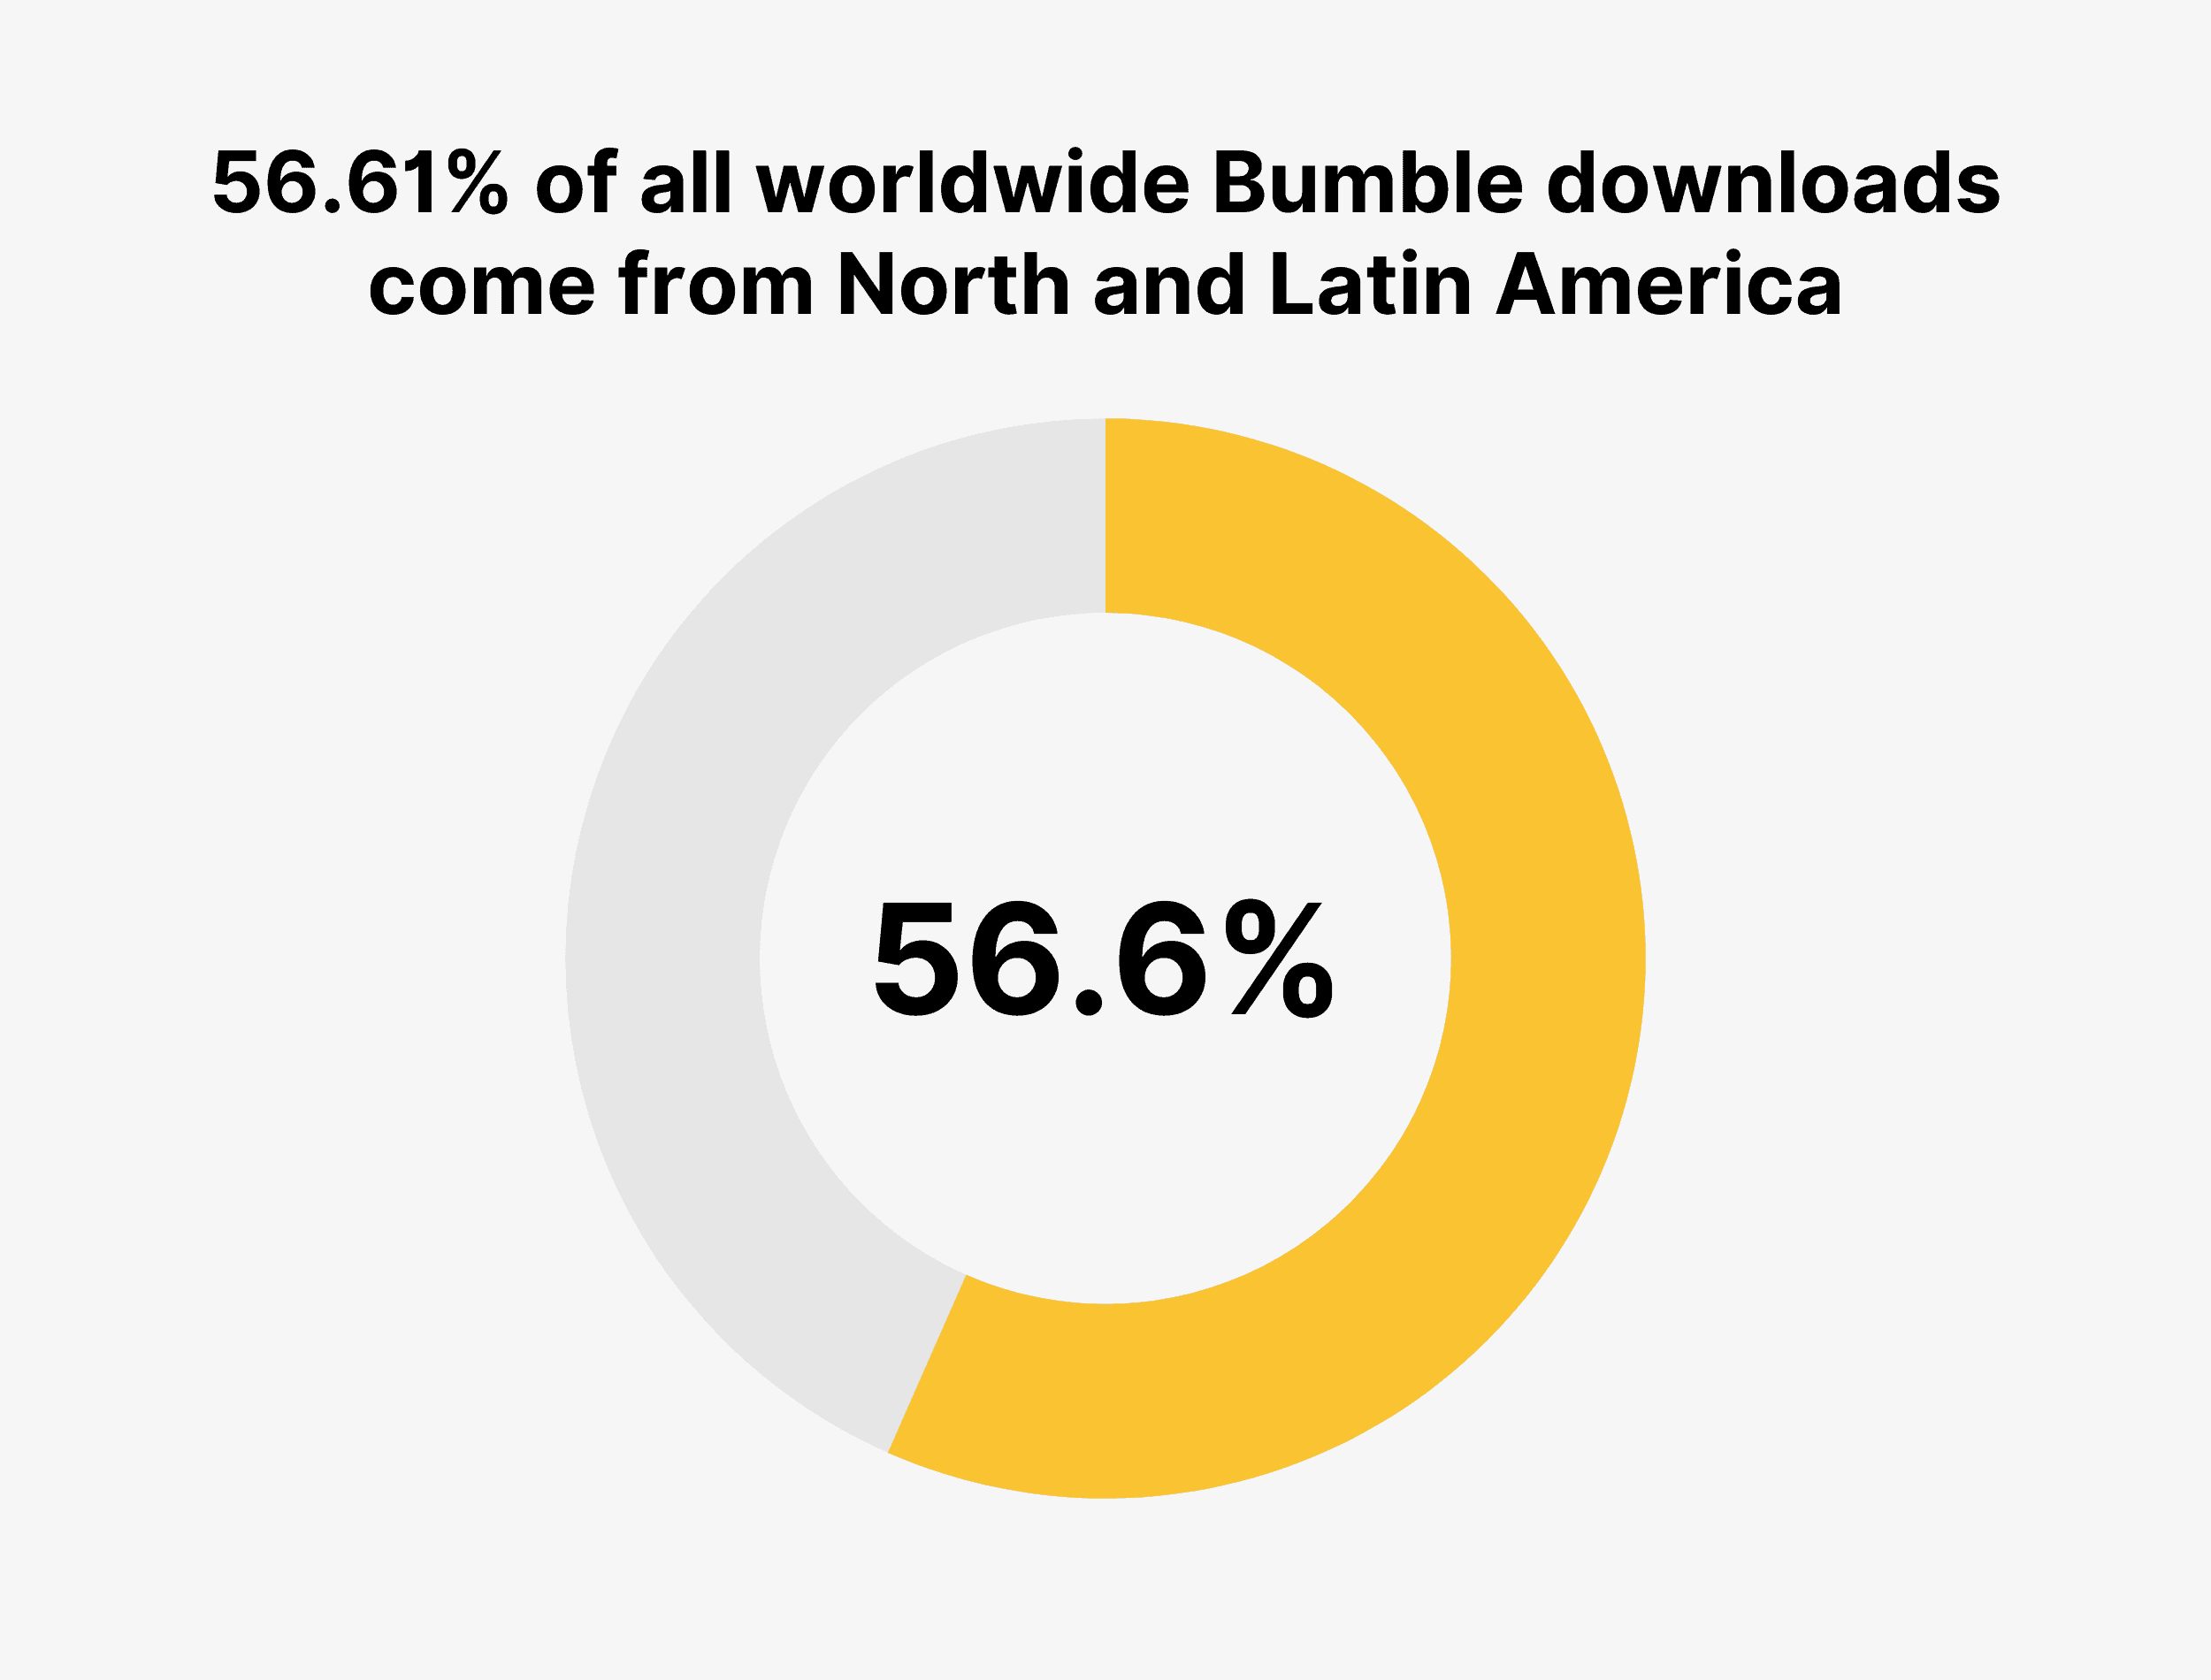 56.61% of all worldwide Bumble downloads come from North and Latin America